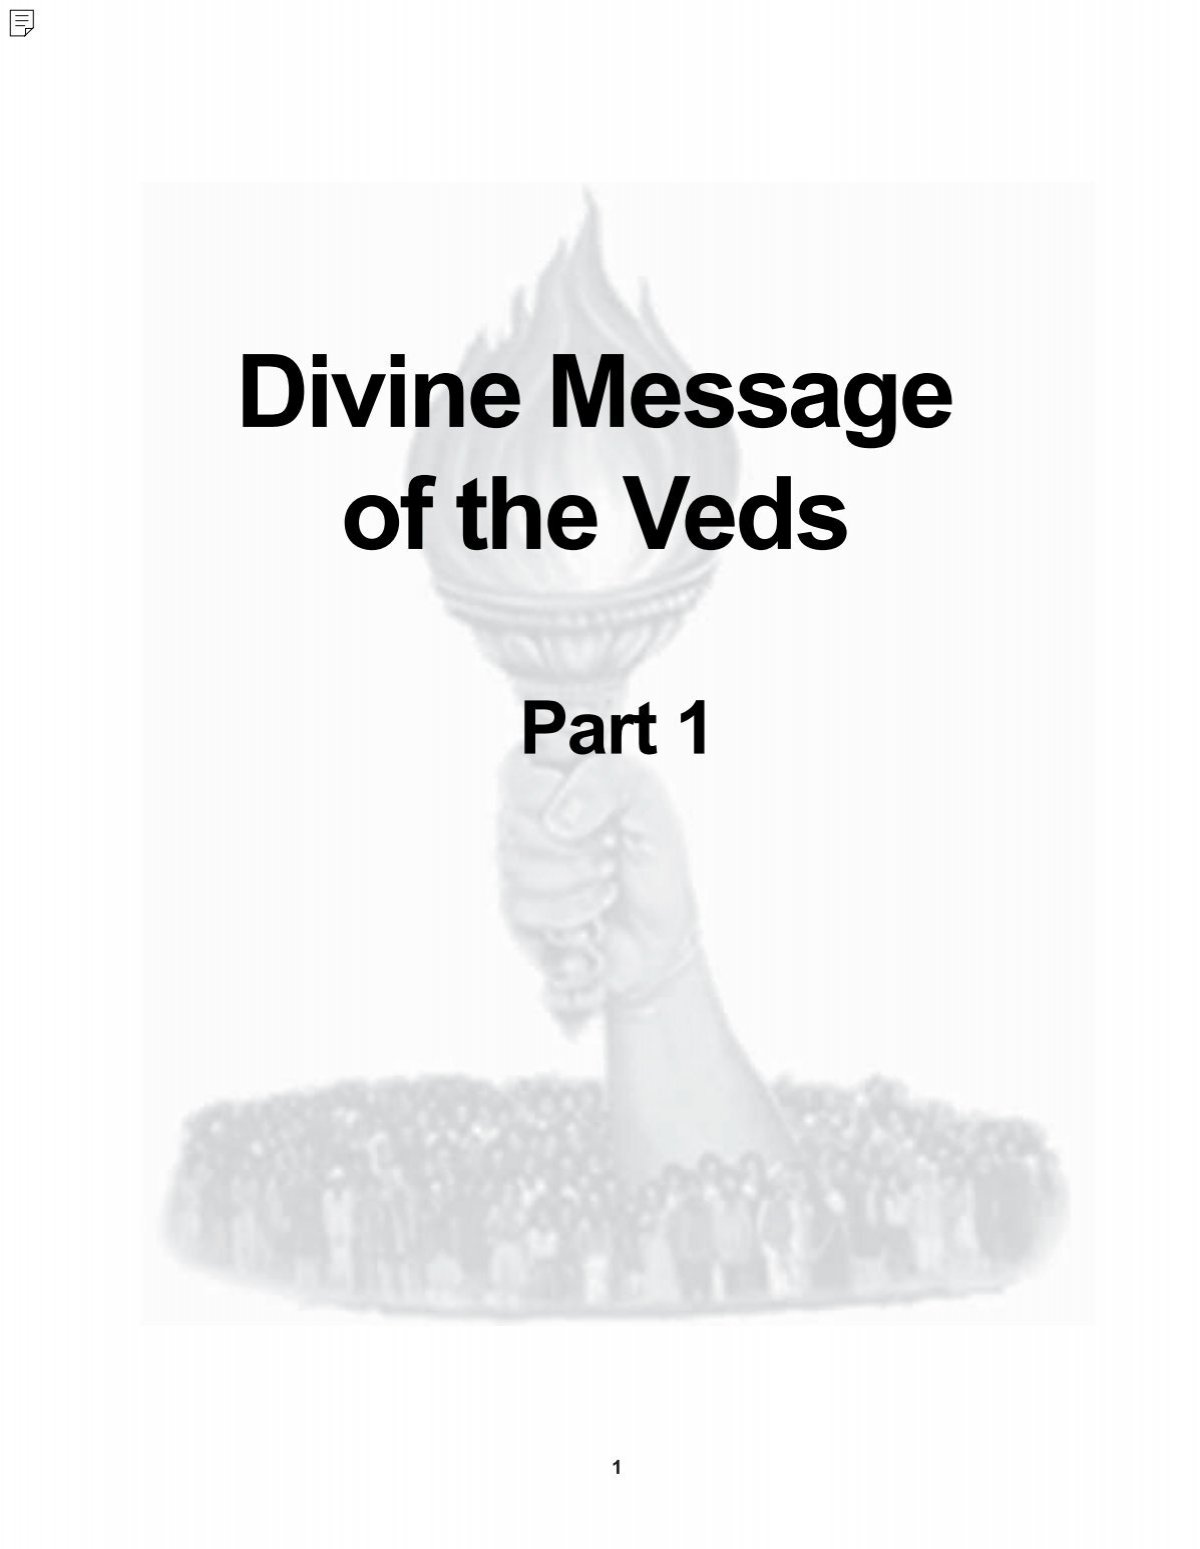 Divine Message of the Veds - The SA Hindu Link